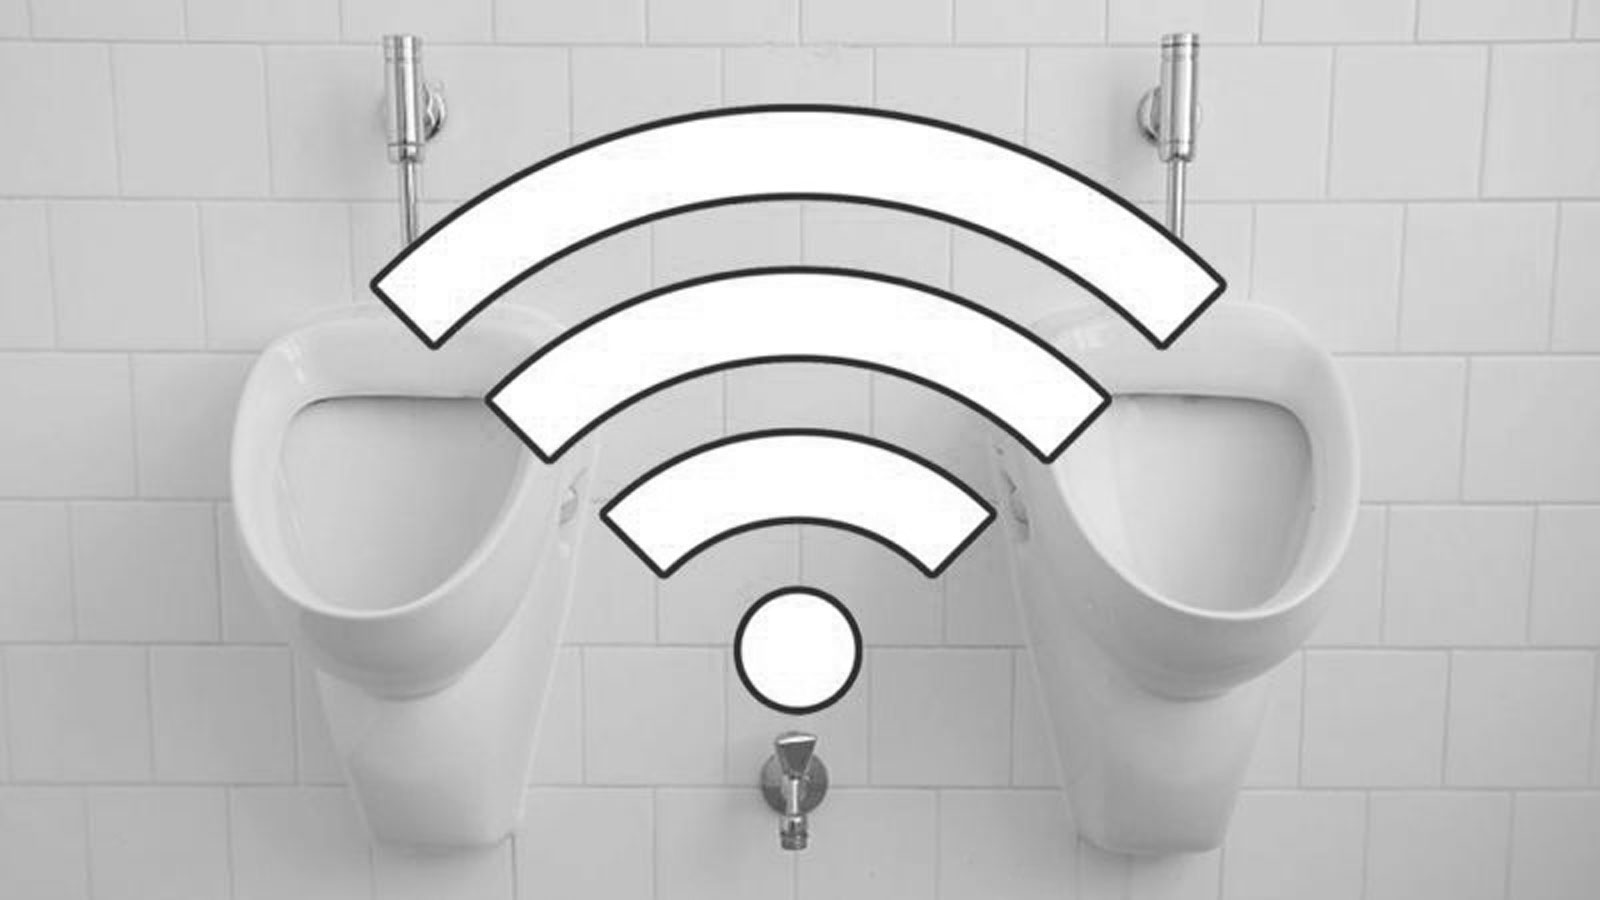 22,000 People Agreed to Clean Human Waste in a WiFi Privacy Policy